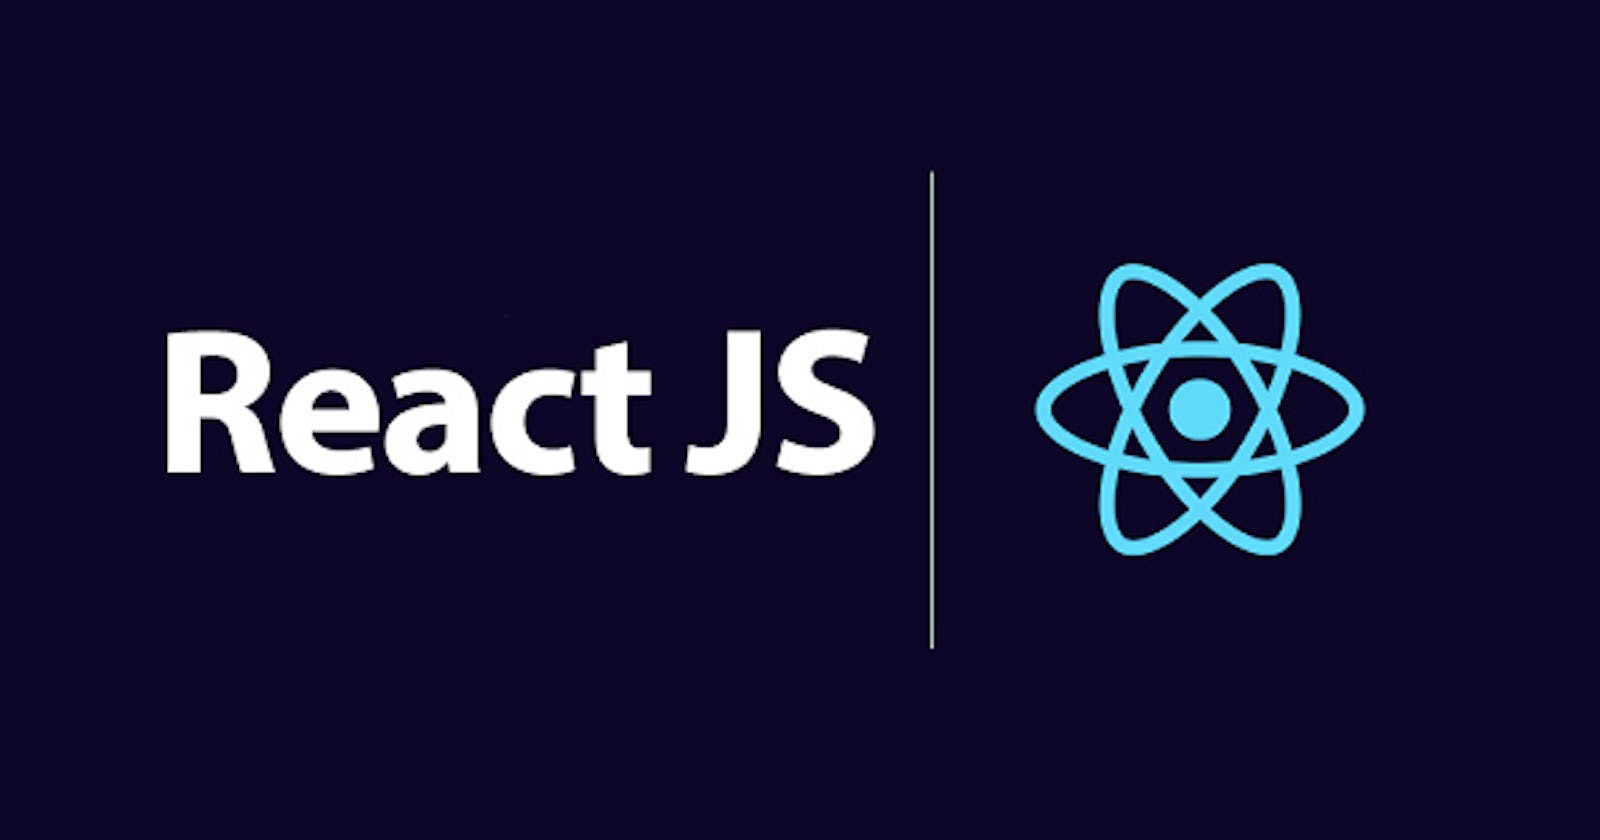 Why REACT ? What features does React give ?(Beginner friendly)